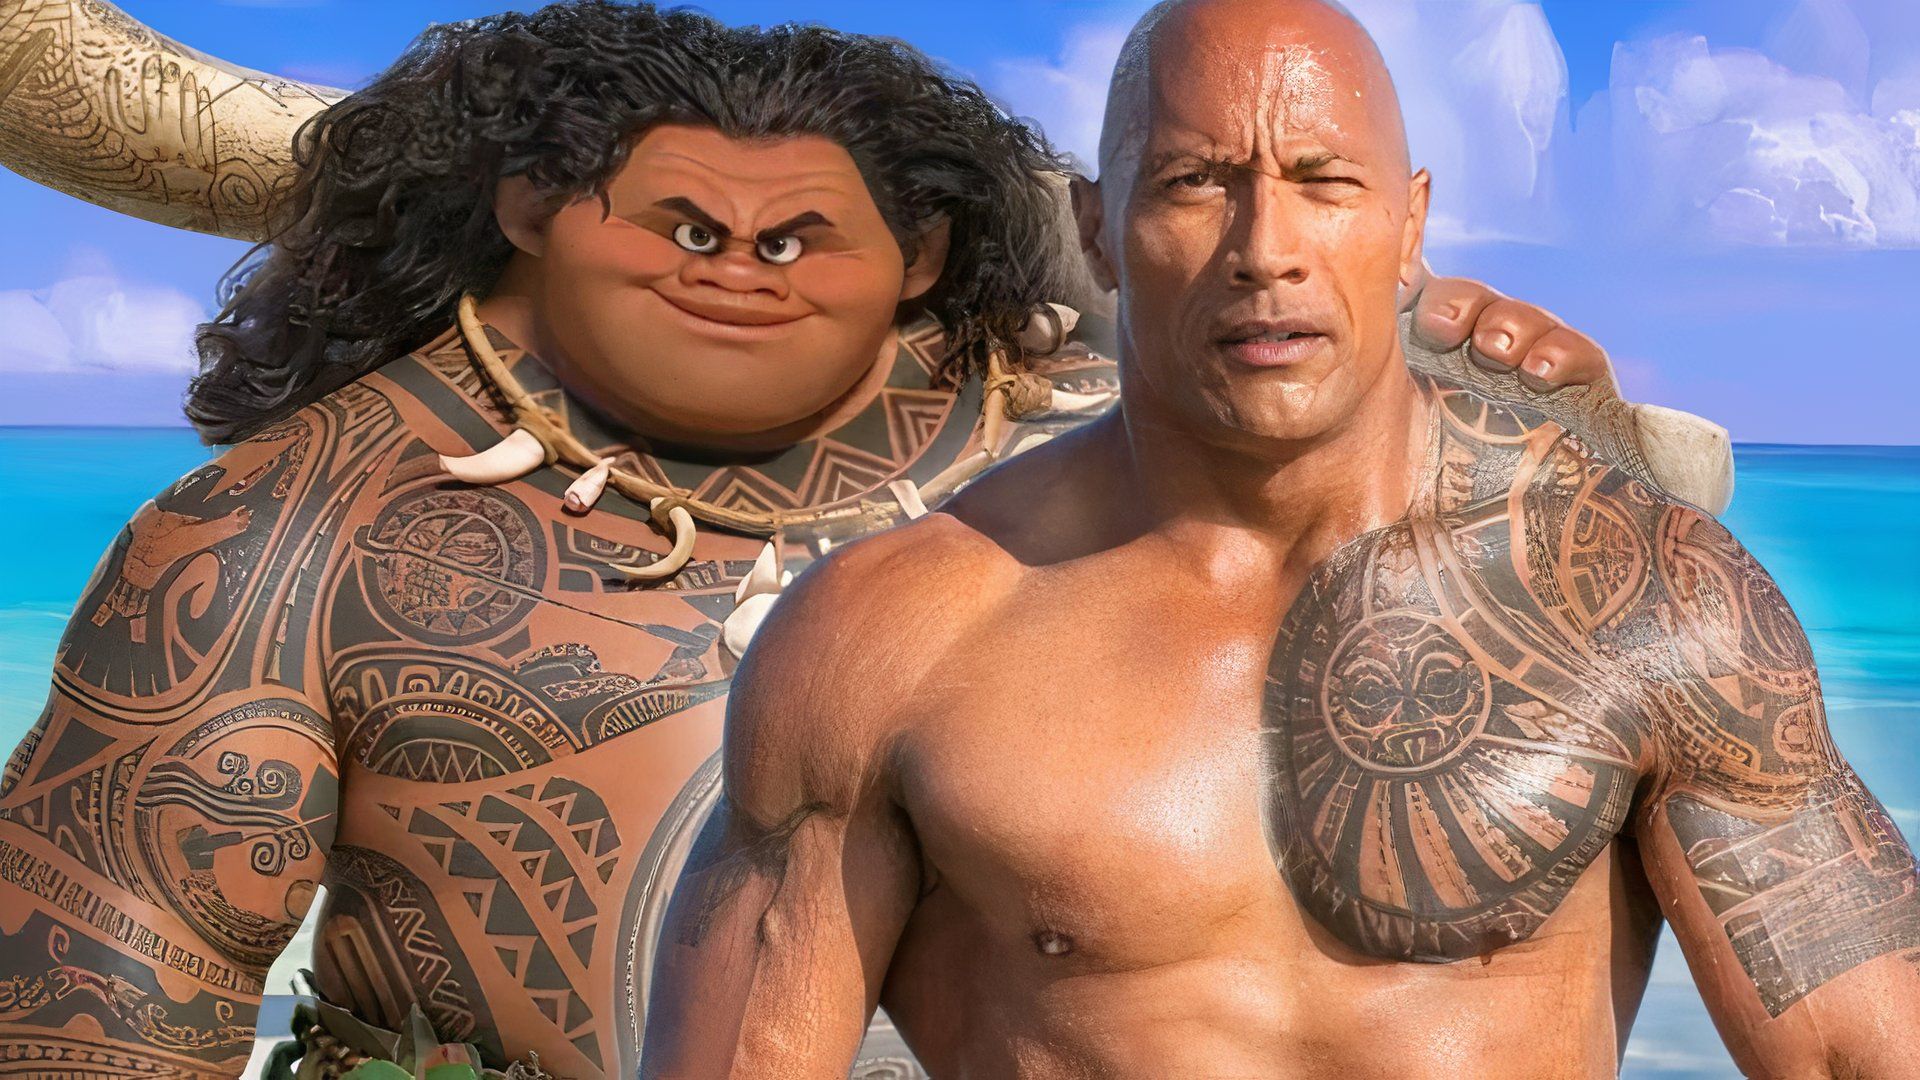 The live-action remake of “Vaiana” receives an exciting update from Dwayne “The Rock” Johnson